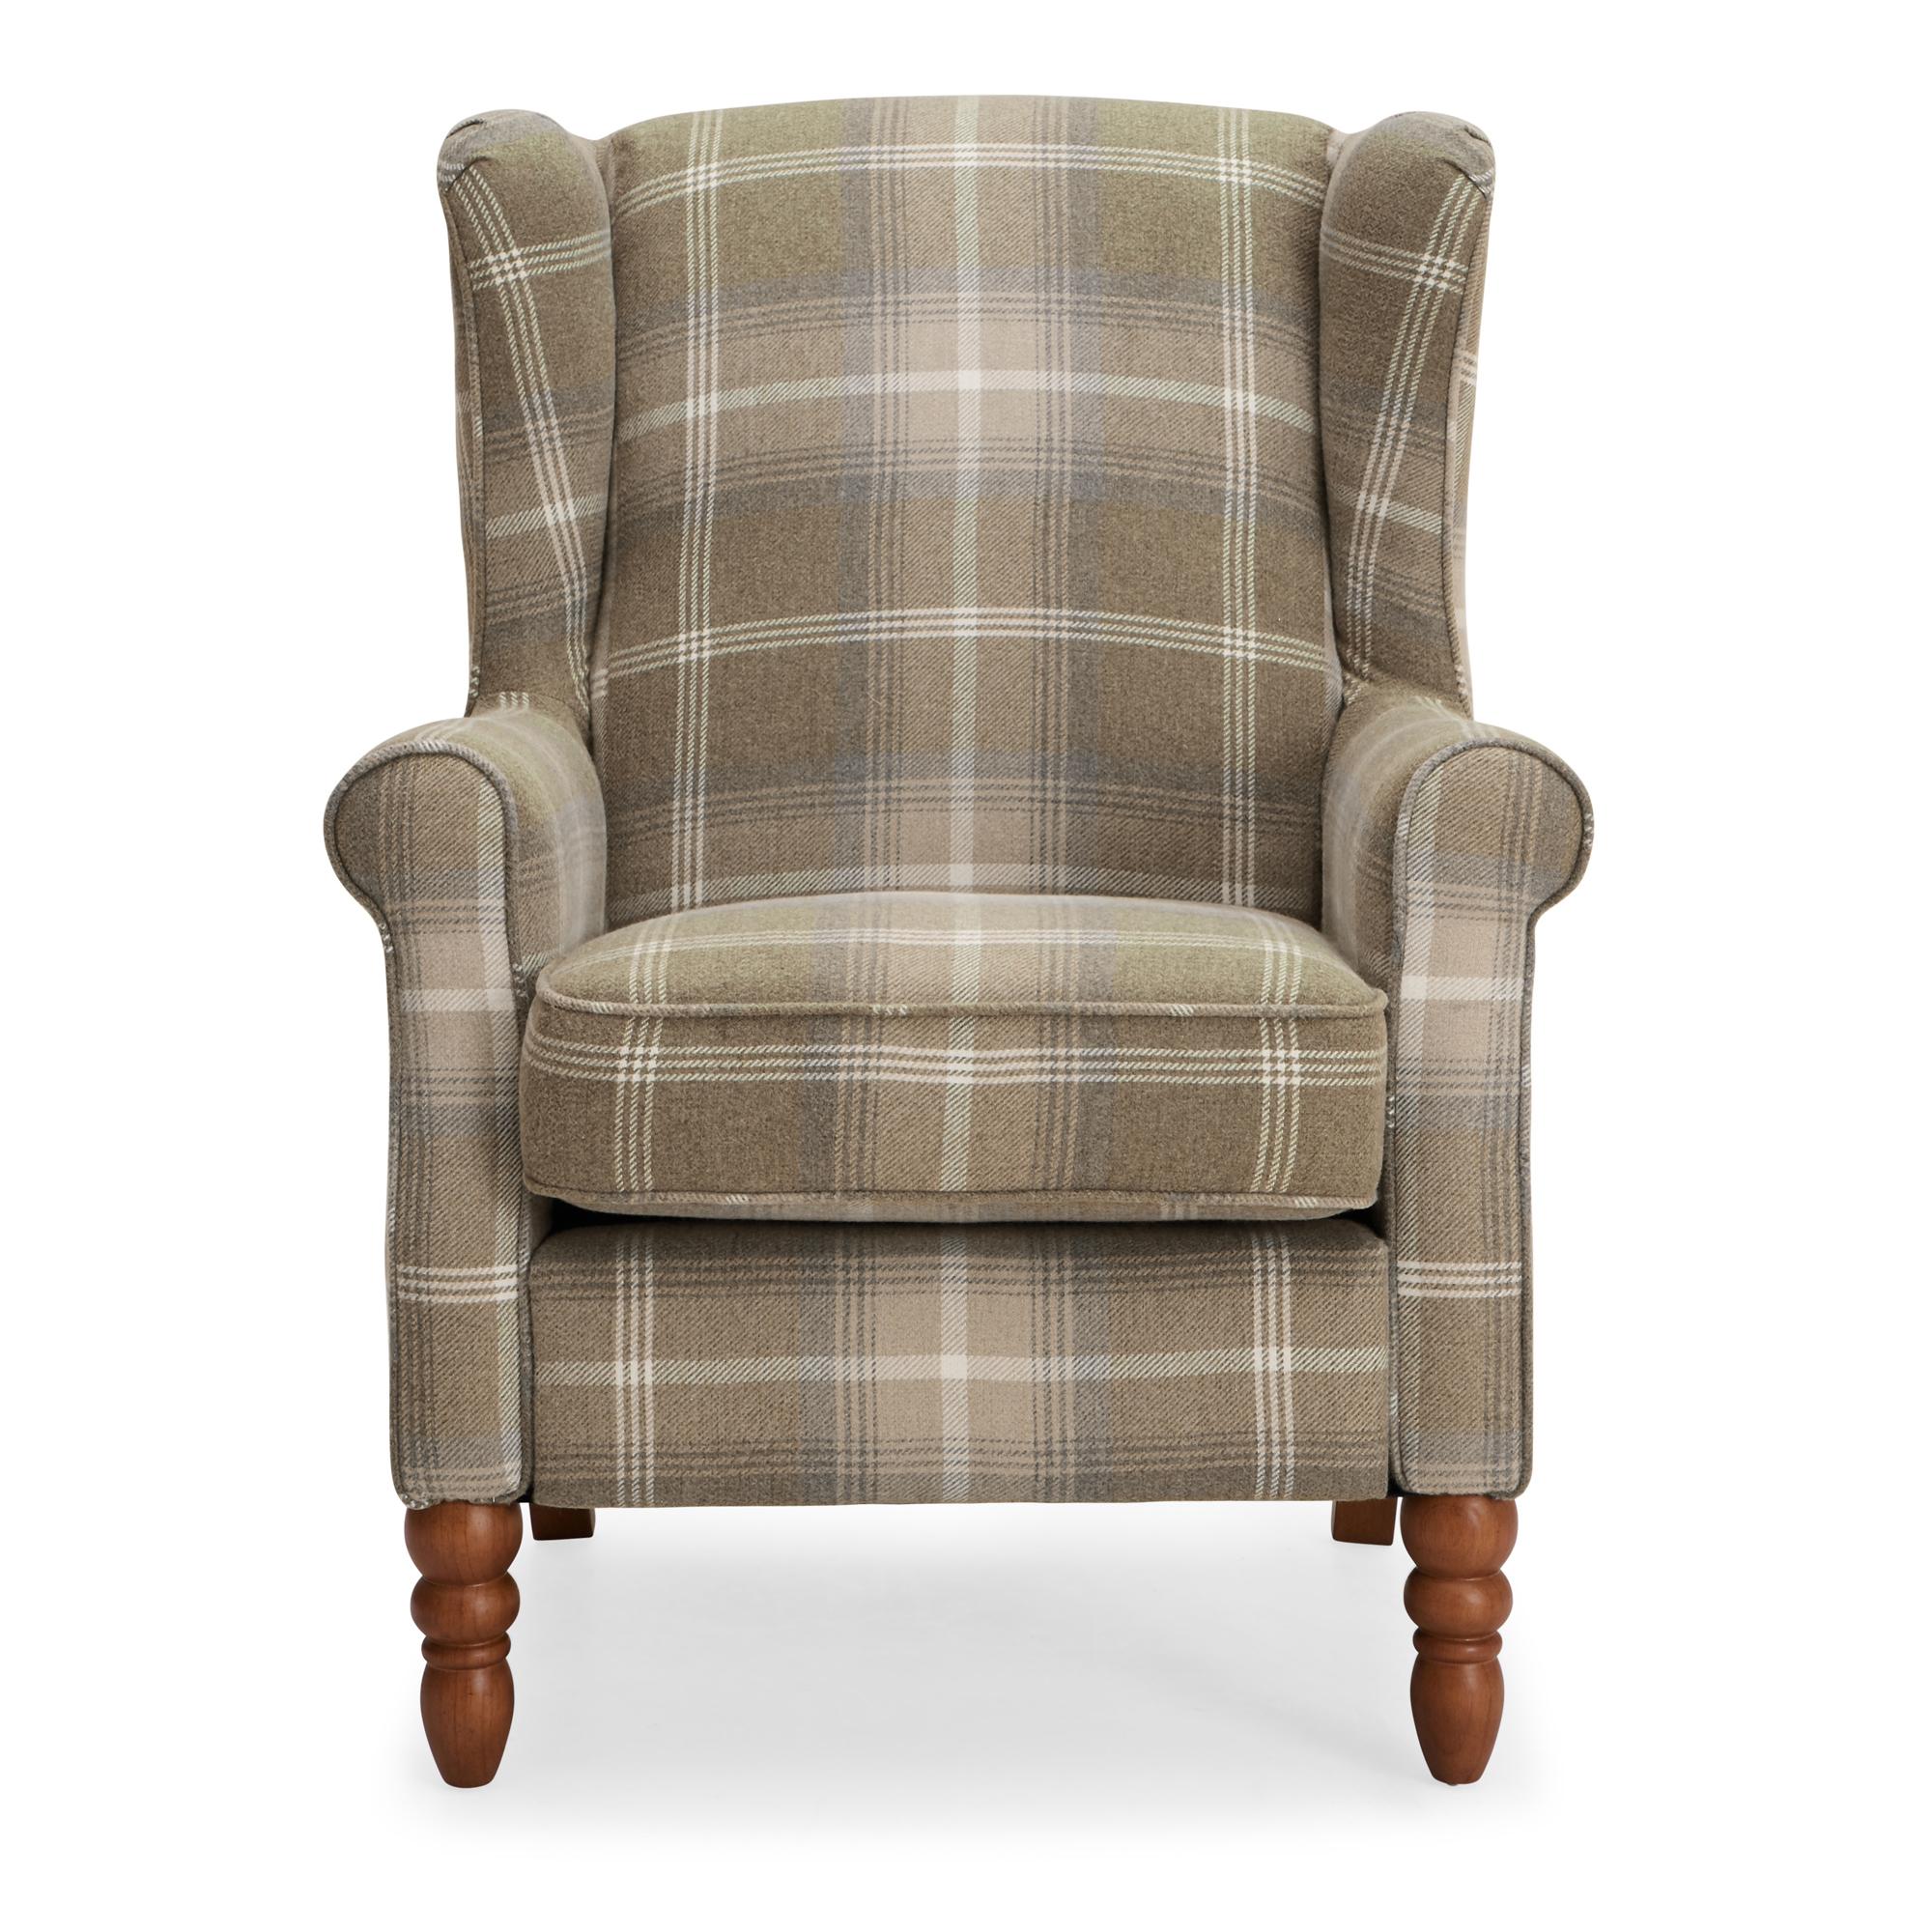 Oswald Check Wingback Armchair - Natural